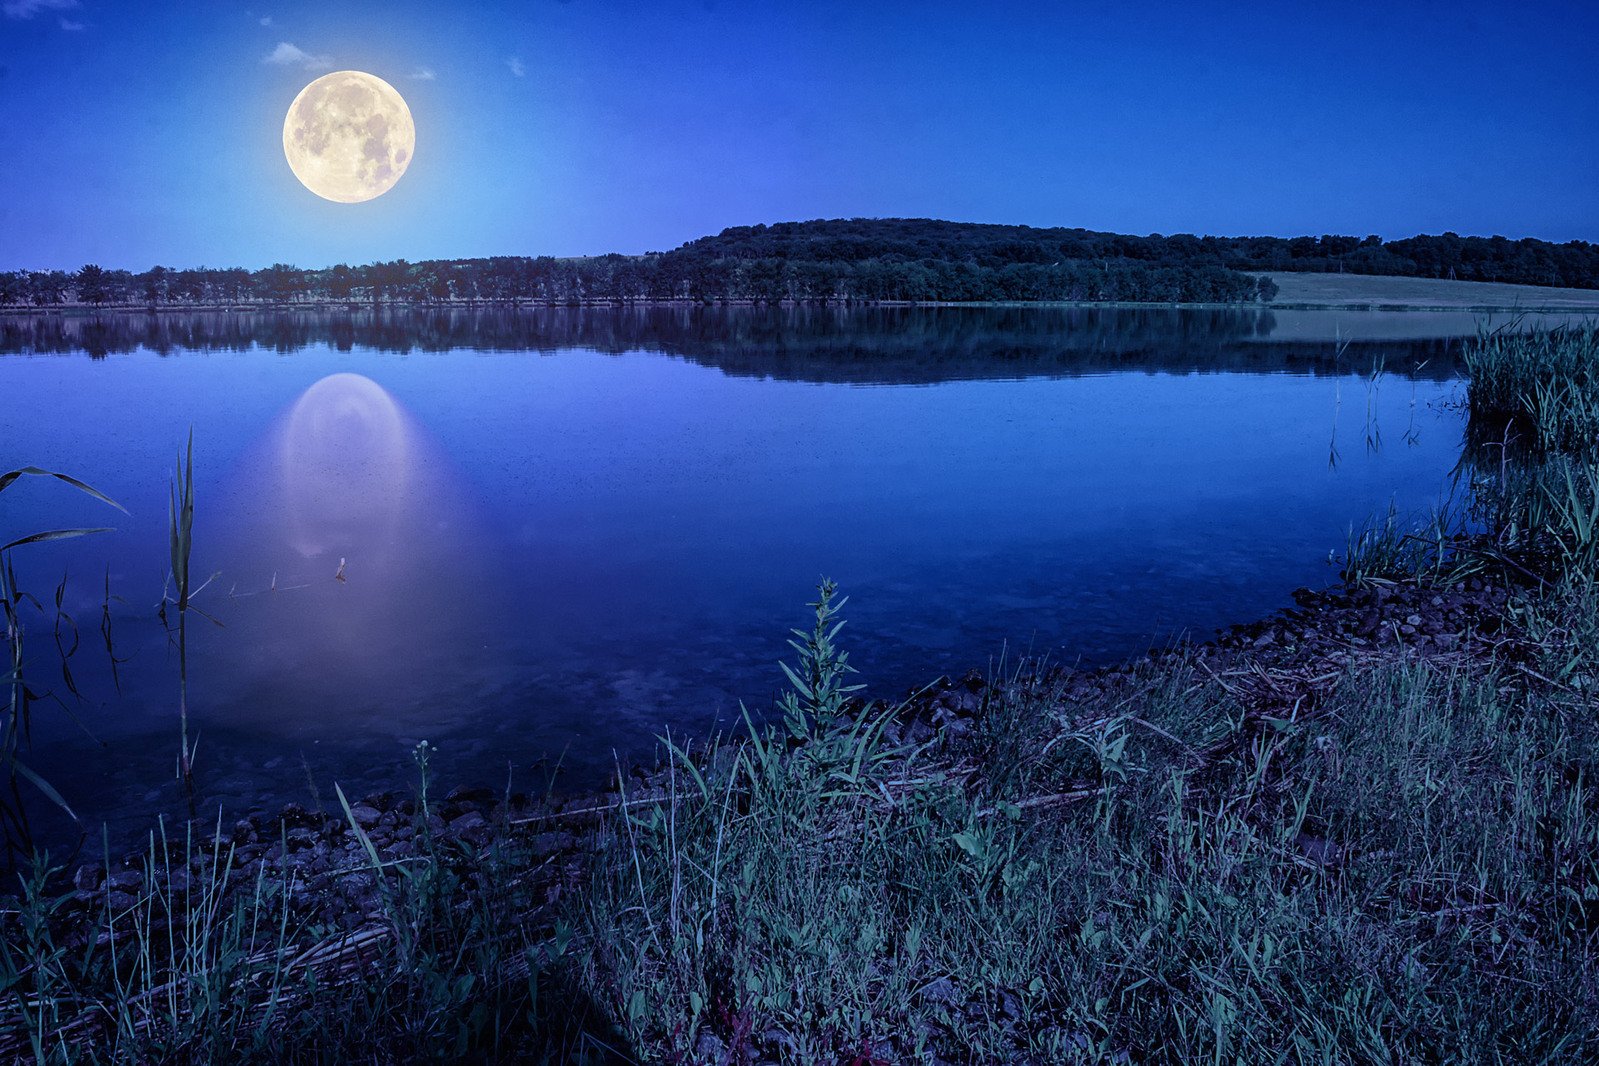 the night sky is filled with the full moon and is reflecting in the water